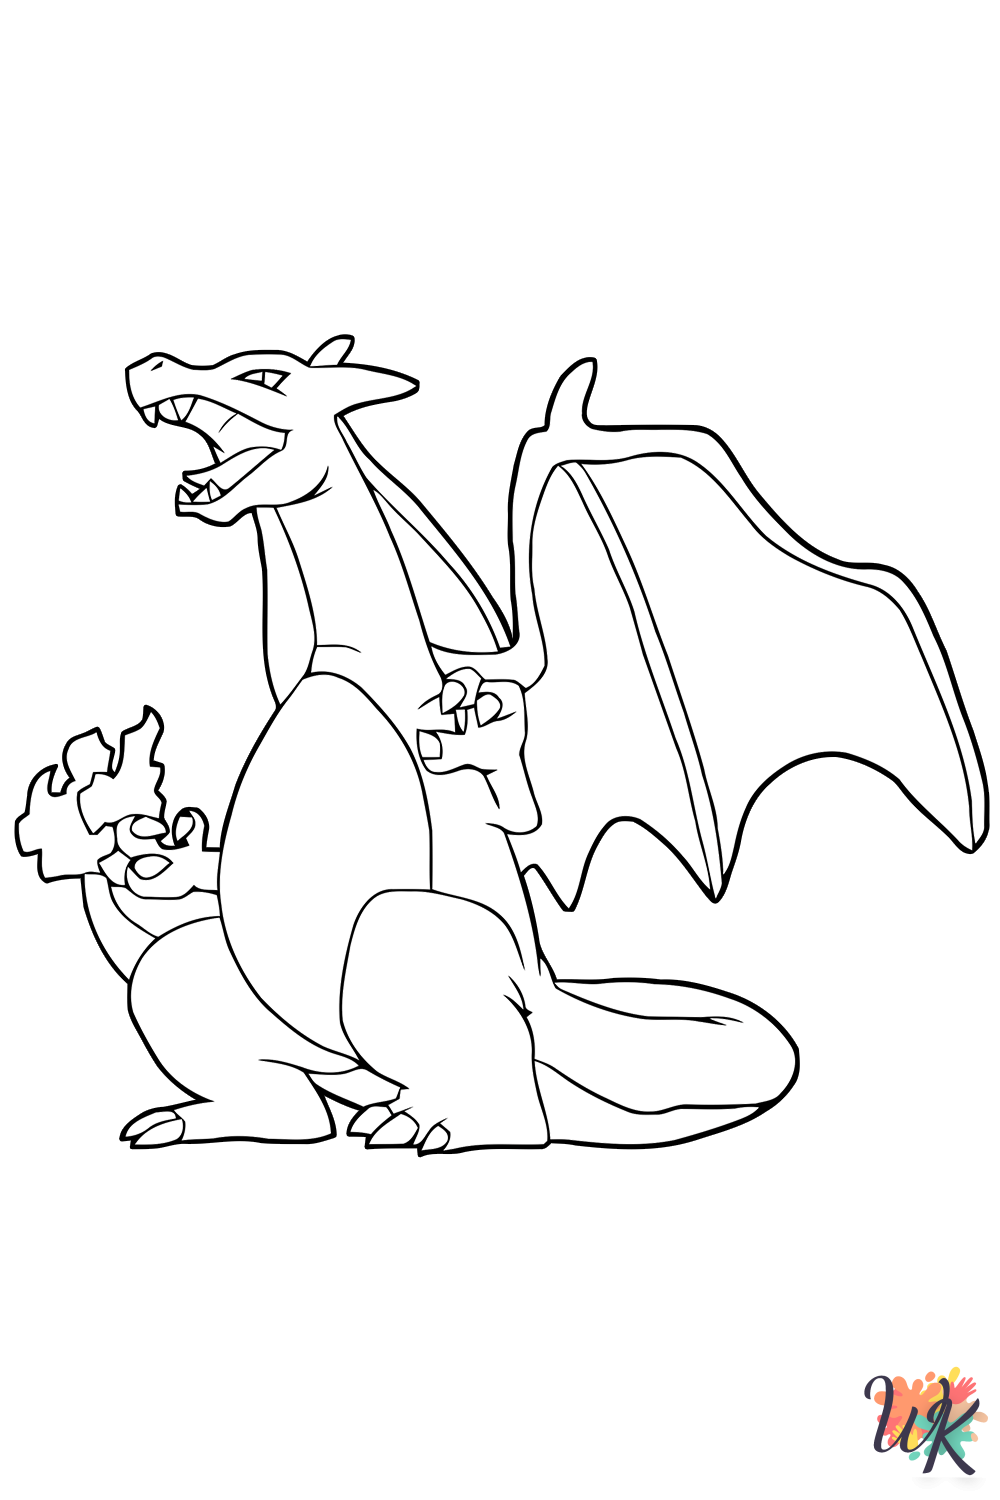 Charizard printable coloring pages